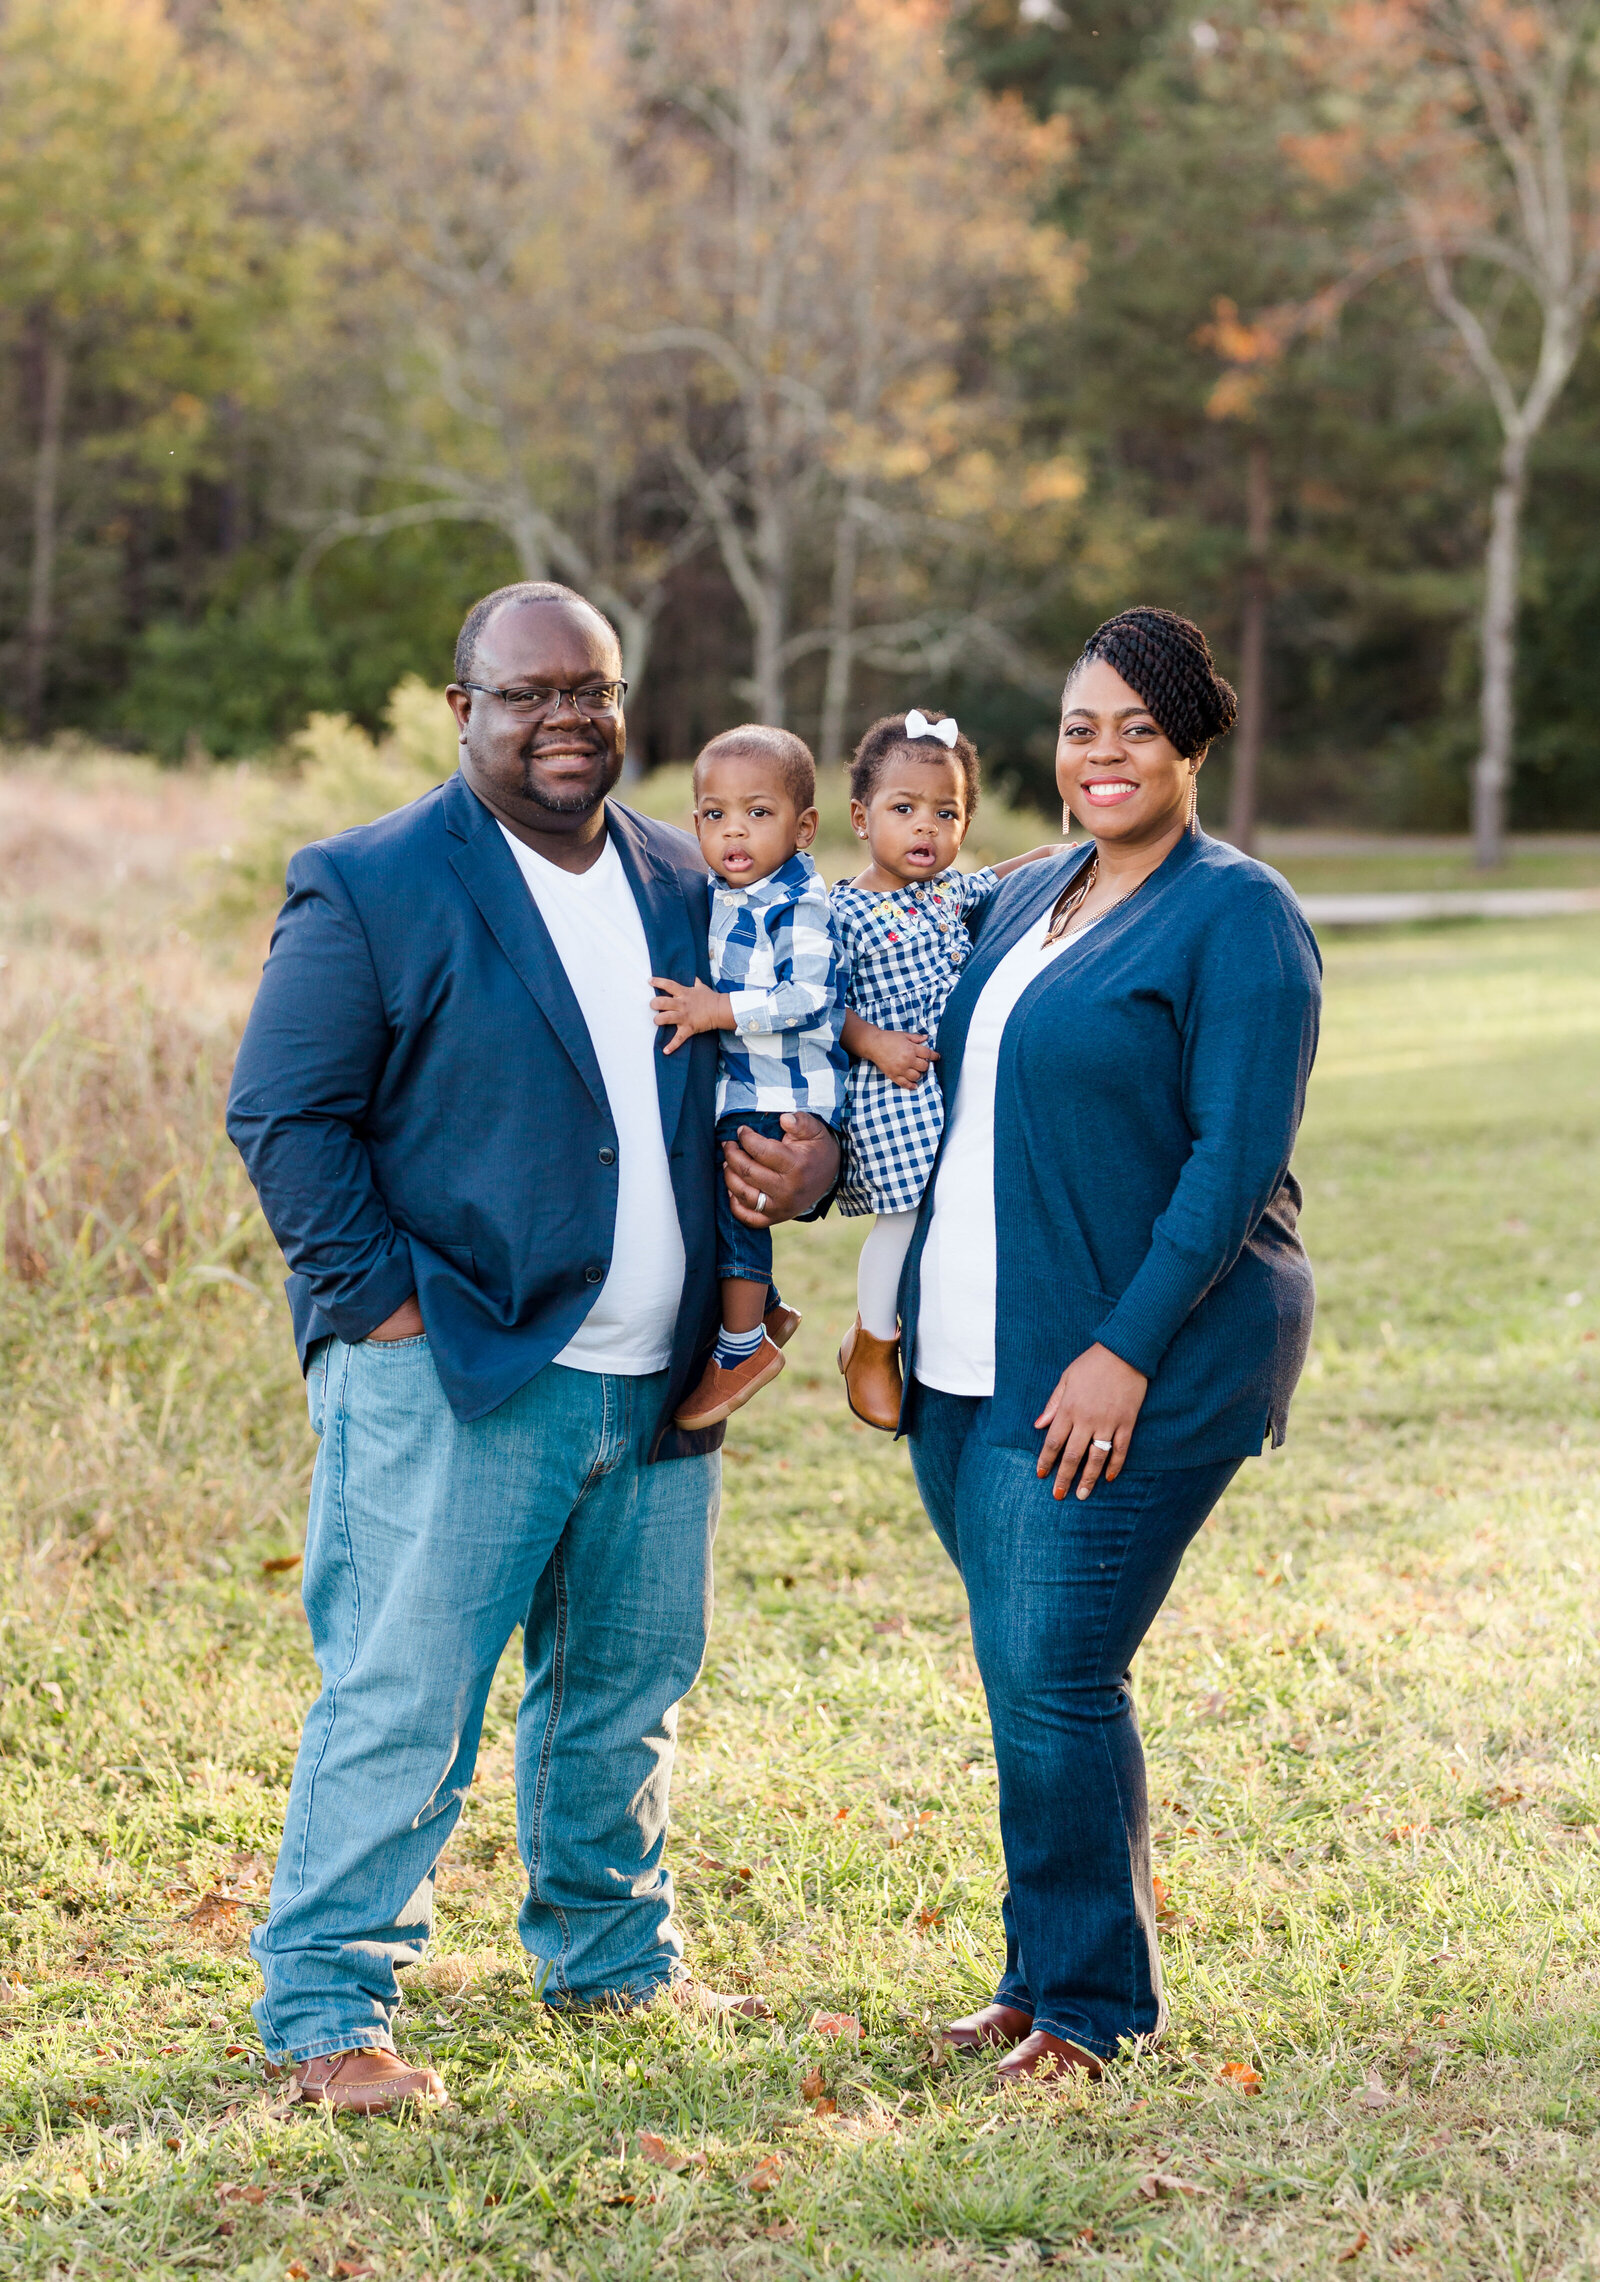 Fall mini sessions in Raleigh NC